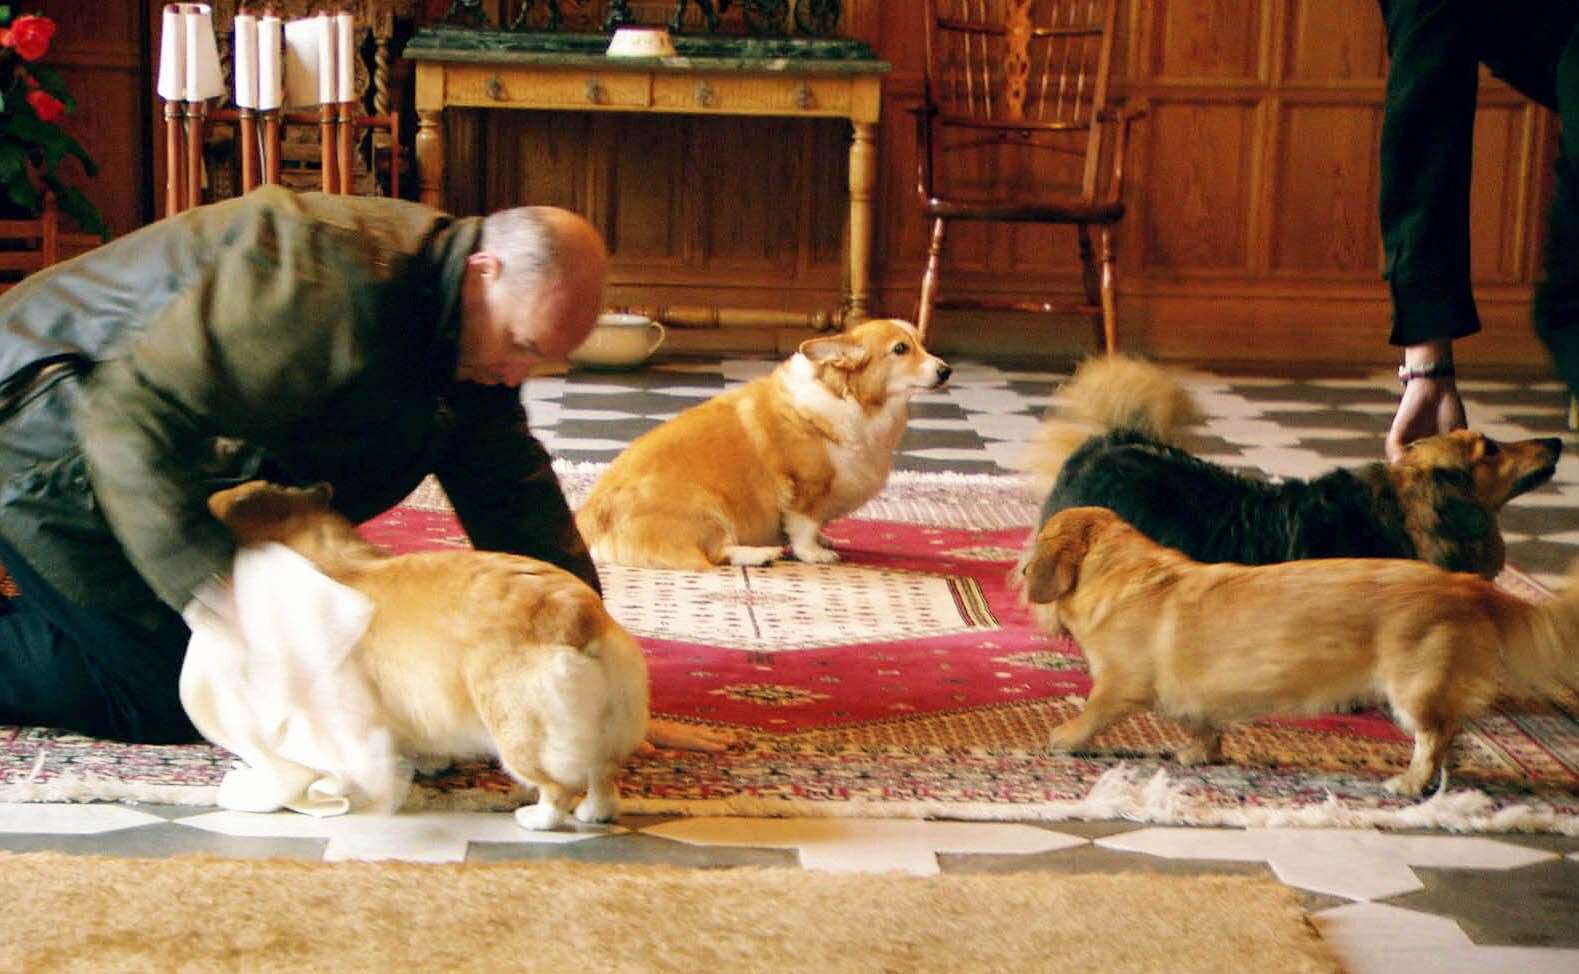 The Queen’s previous corgis being dried after a walk in Balmoral (Oxford Film and Television/PA)